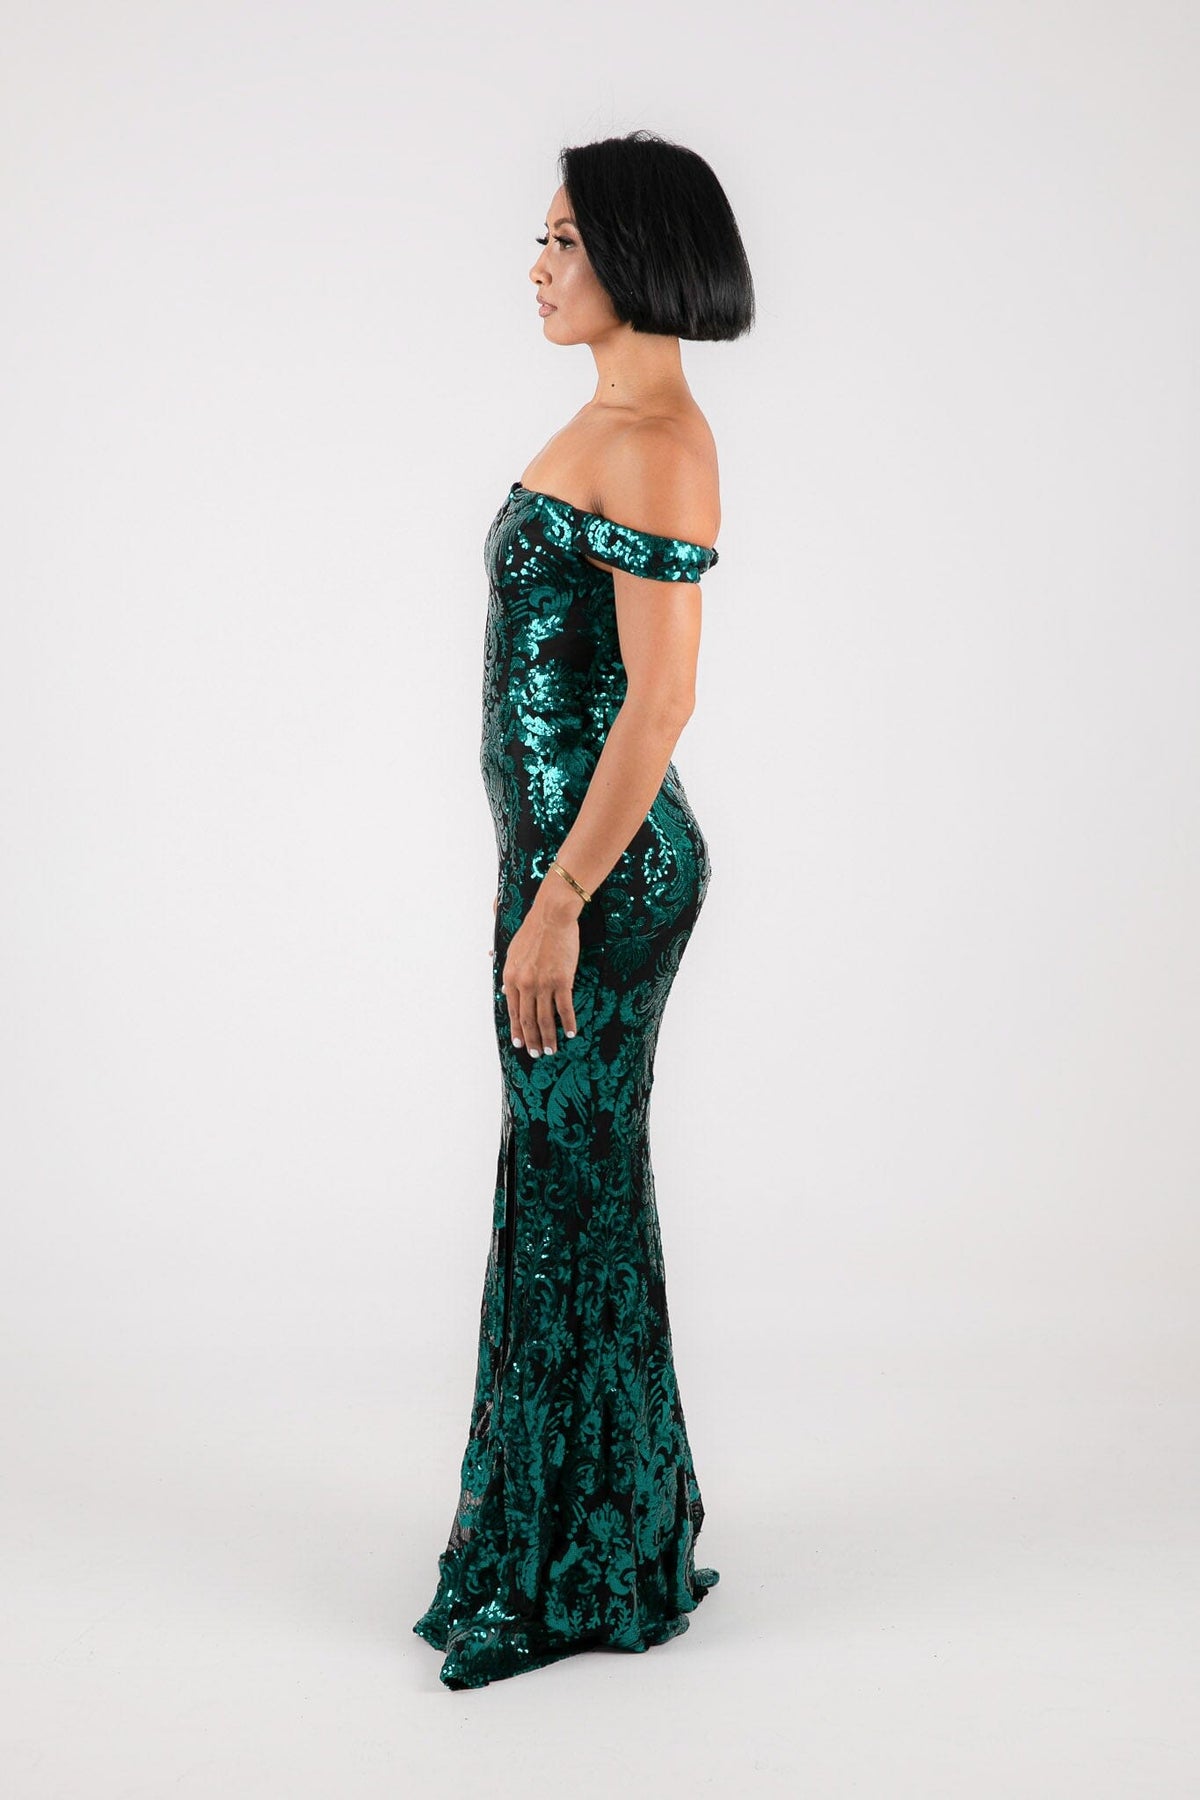 Side Image of Emerald Green Sequins with Black Underlay Off Shoulder Full Length Maxi Dress with V Cut Out Neckline Detail and Slit on the Left Leg